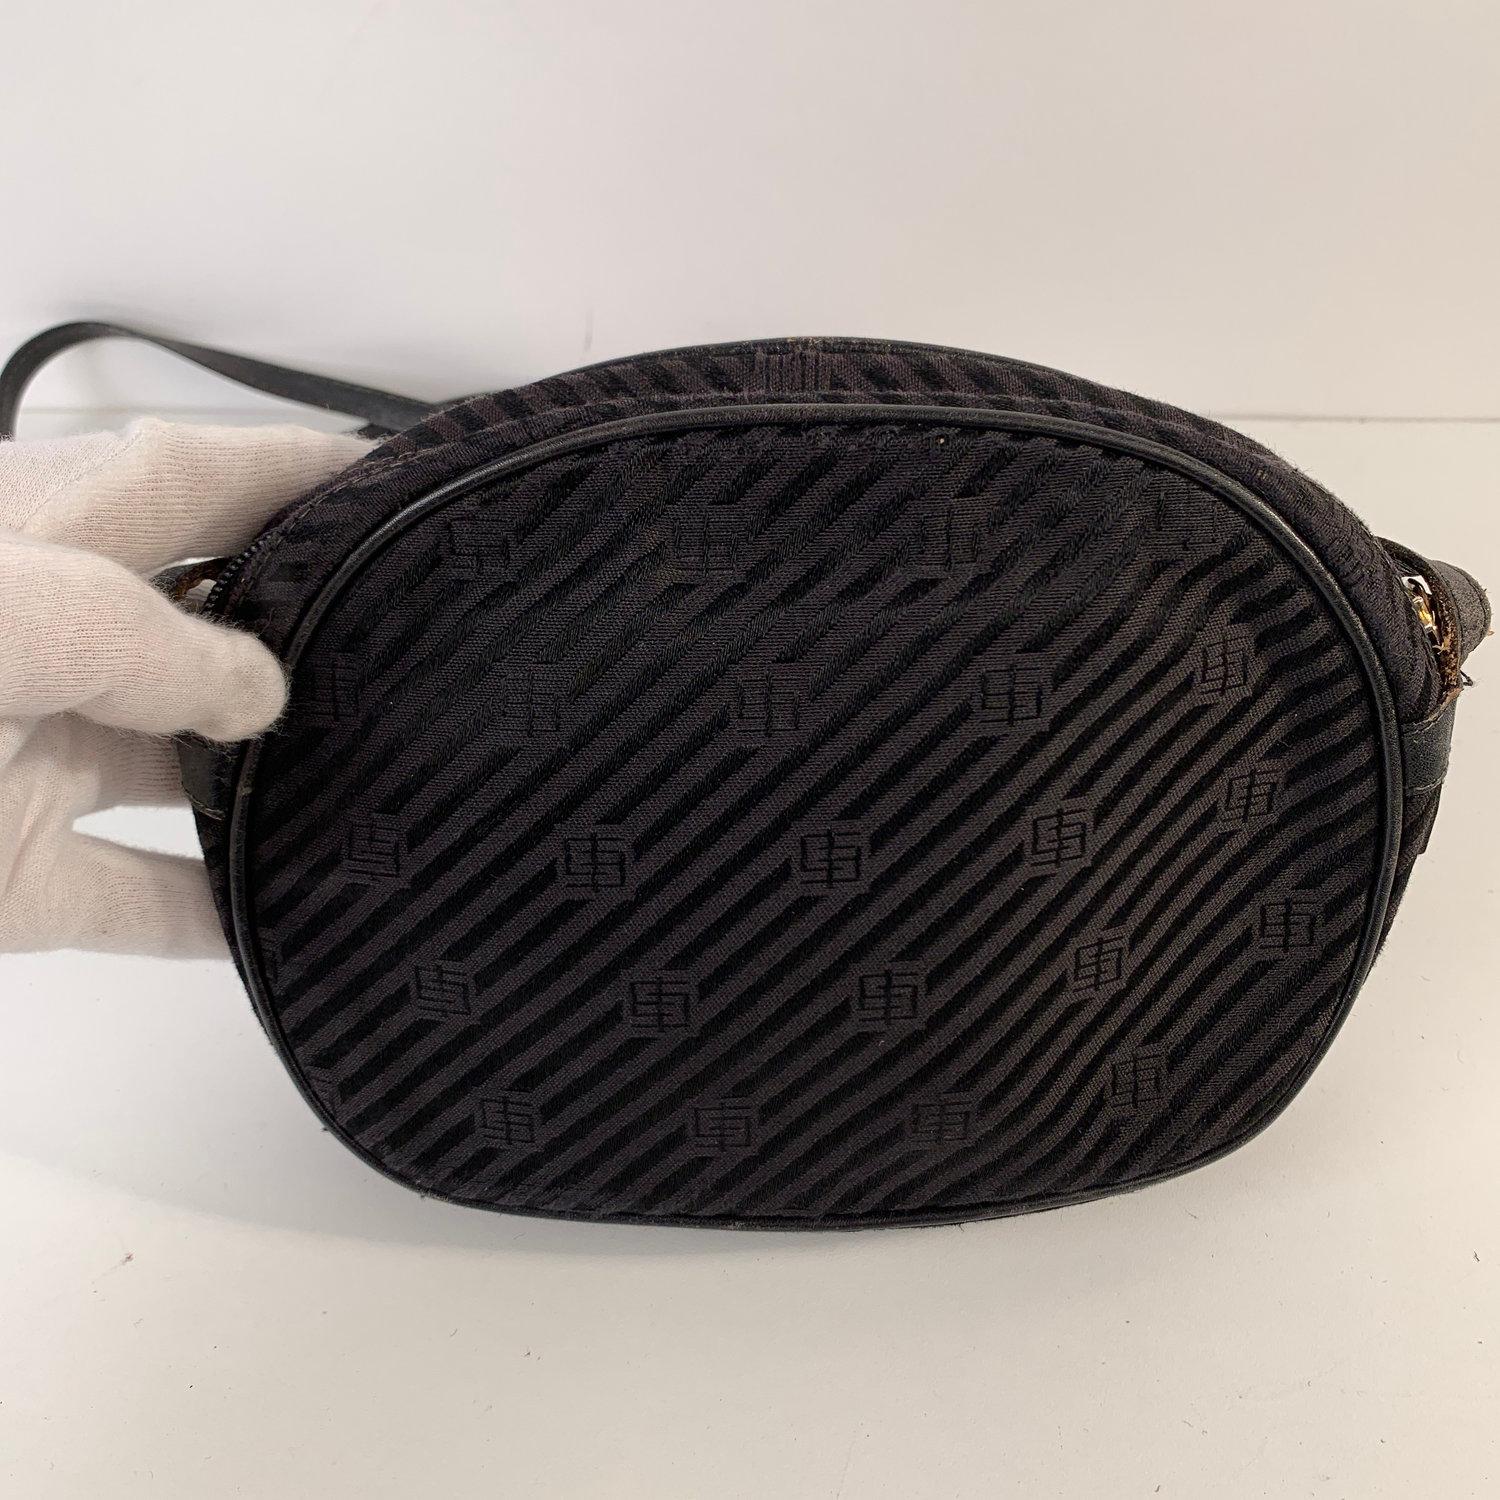 Vintage Emilio Pucci crossbody shoulder bag crafted from black striped canvas with Emilio Pucci monogram pattern. Upper zipper closure. Front open pocket. Signature hardware.'Emilio Pucci - Made in Italy' tag inside





Details

MATERIAL: